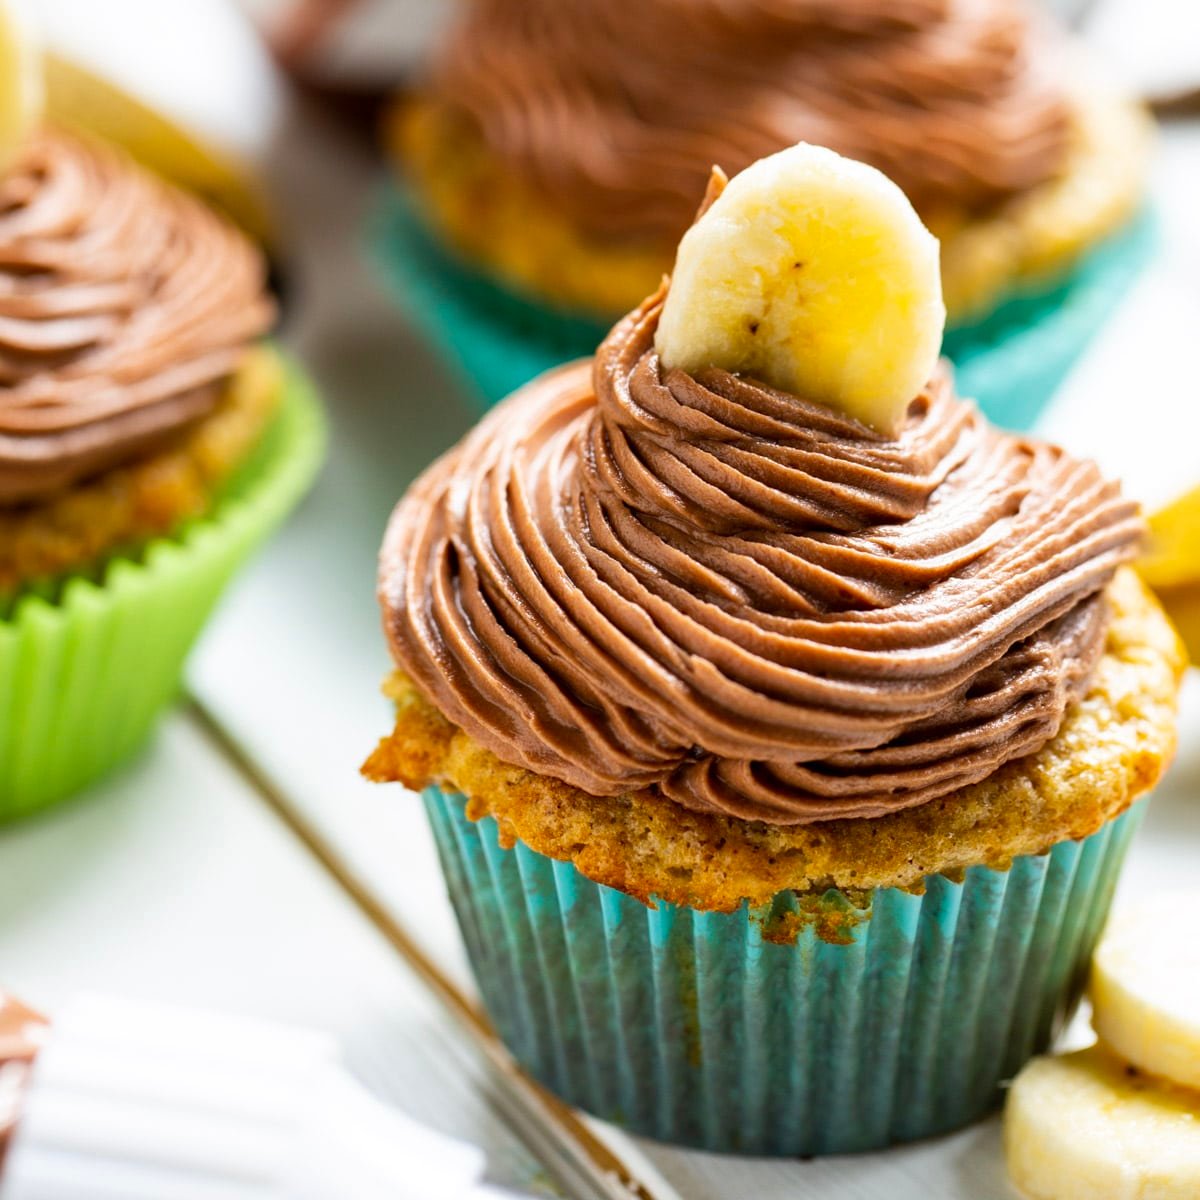 Three Banana Cupcakes with Nutella Frosting.